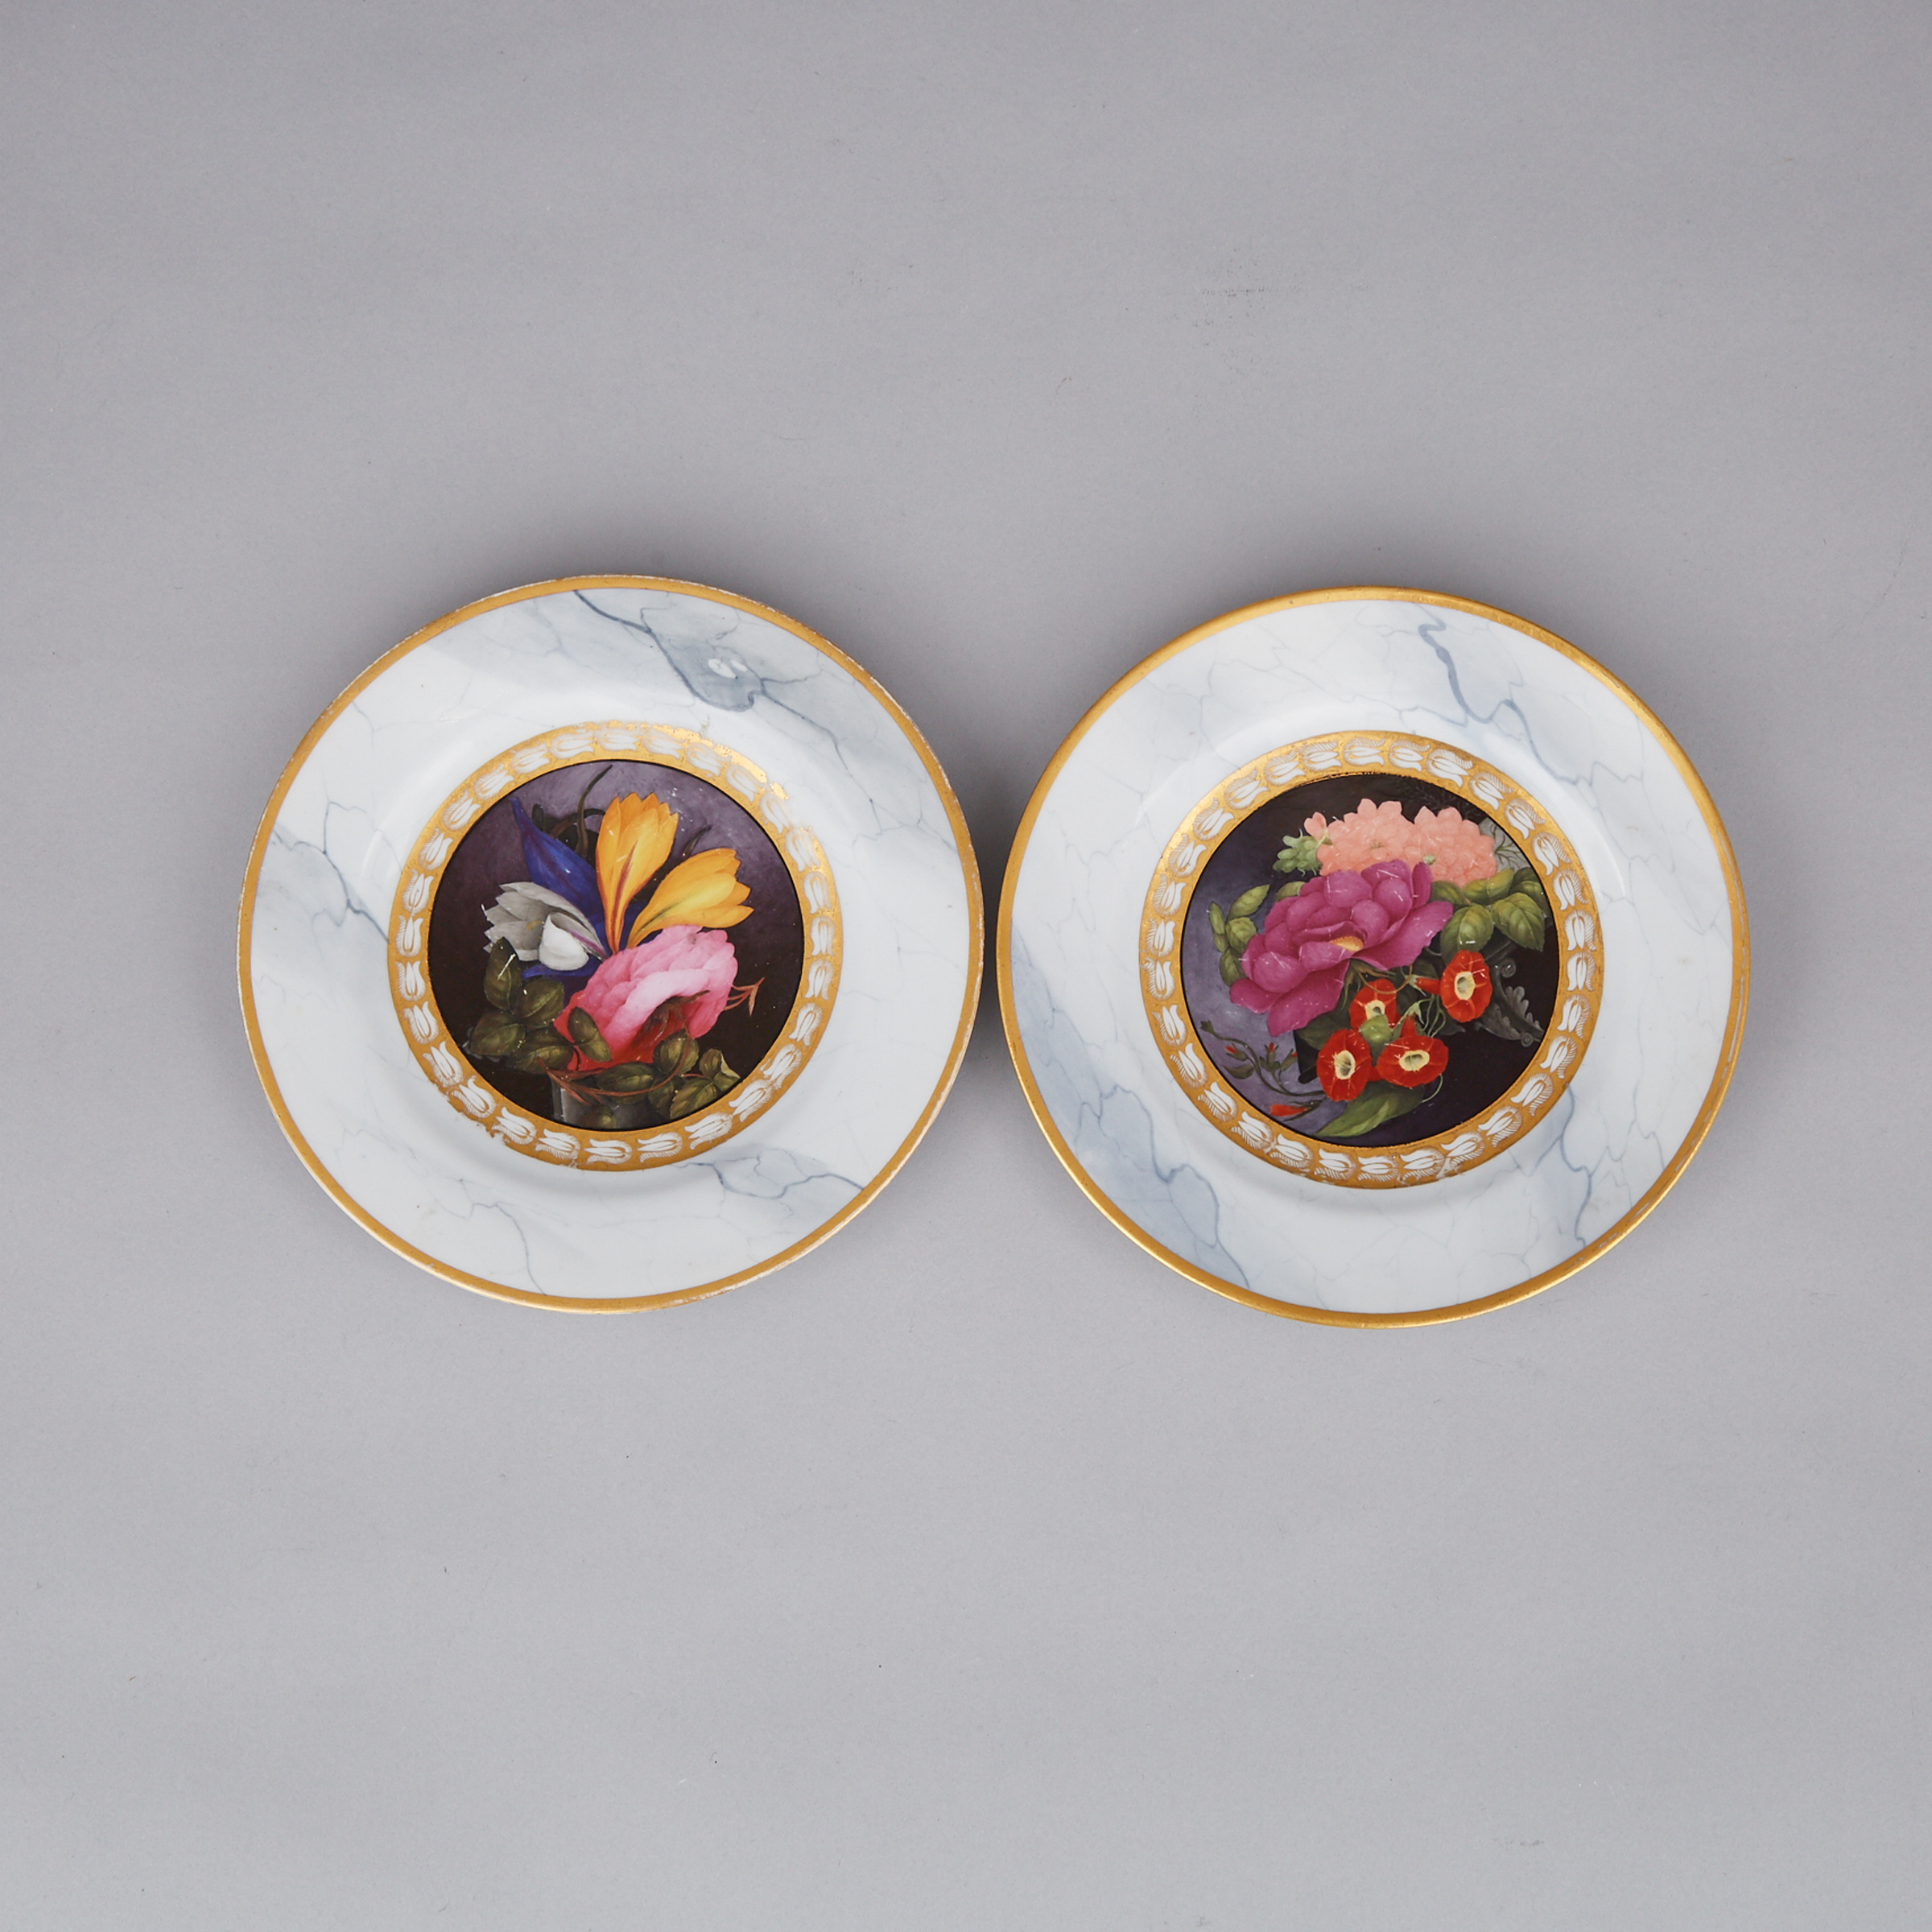 Pair of Barr, Flight & Barr Worcester Grey Marbled Ground Plates with Floral Panels, c.1810